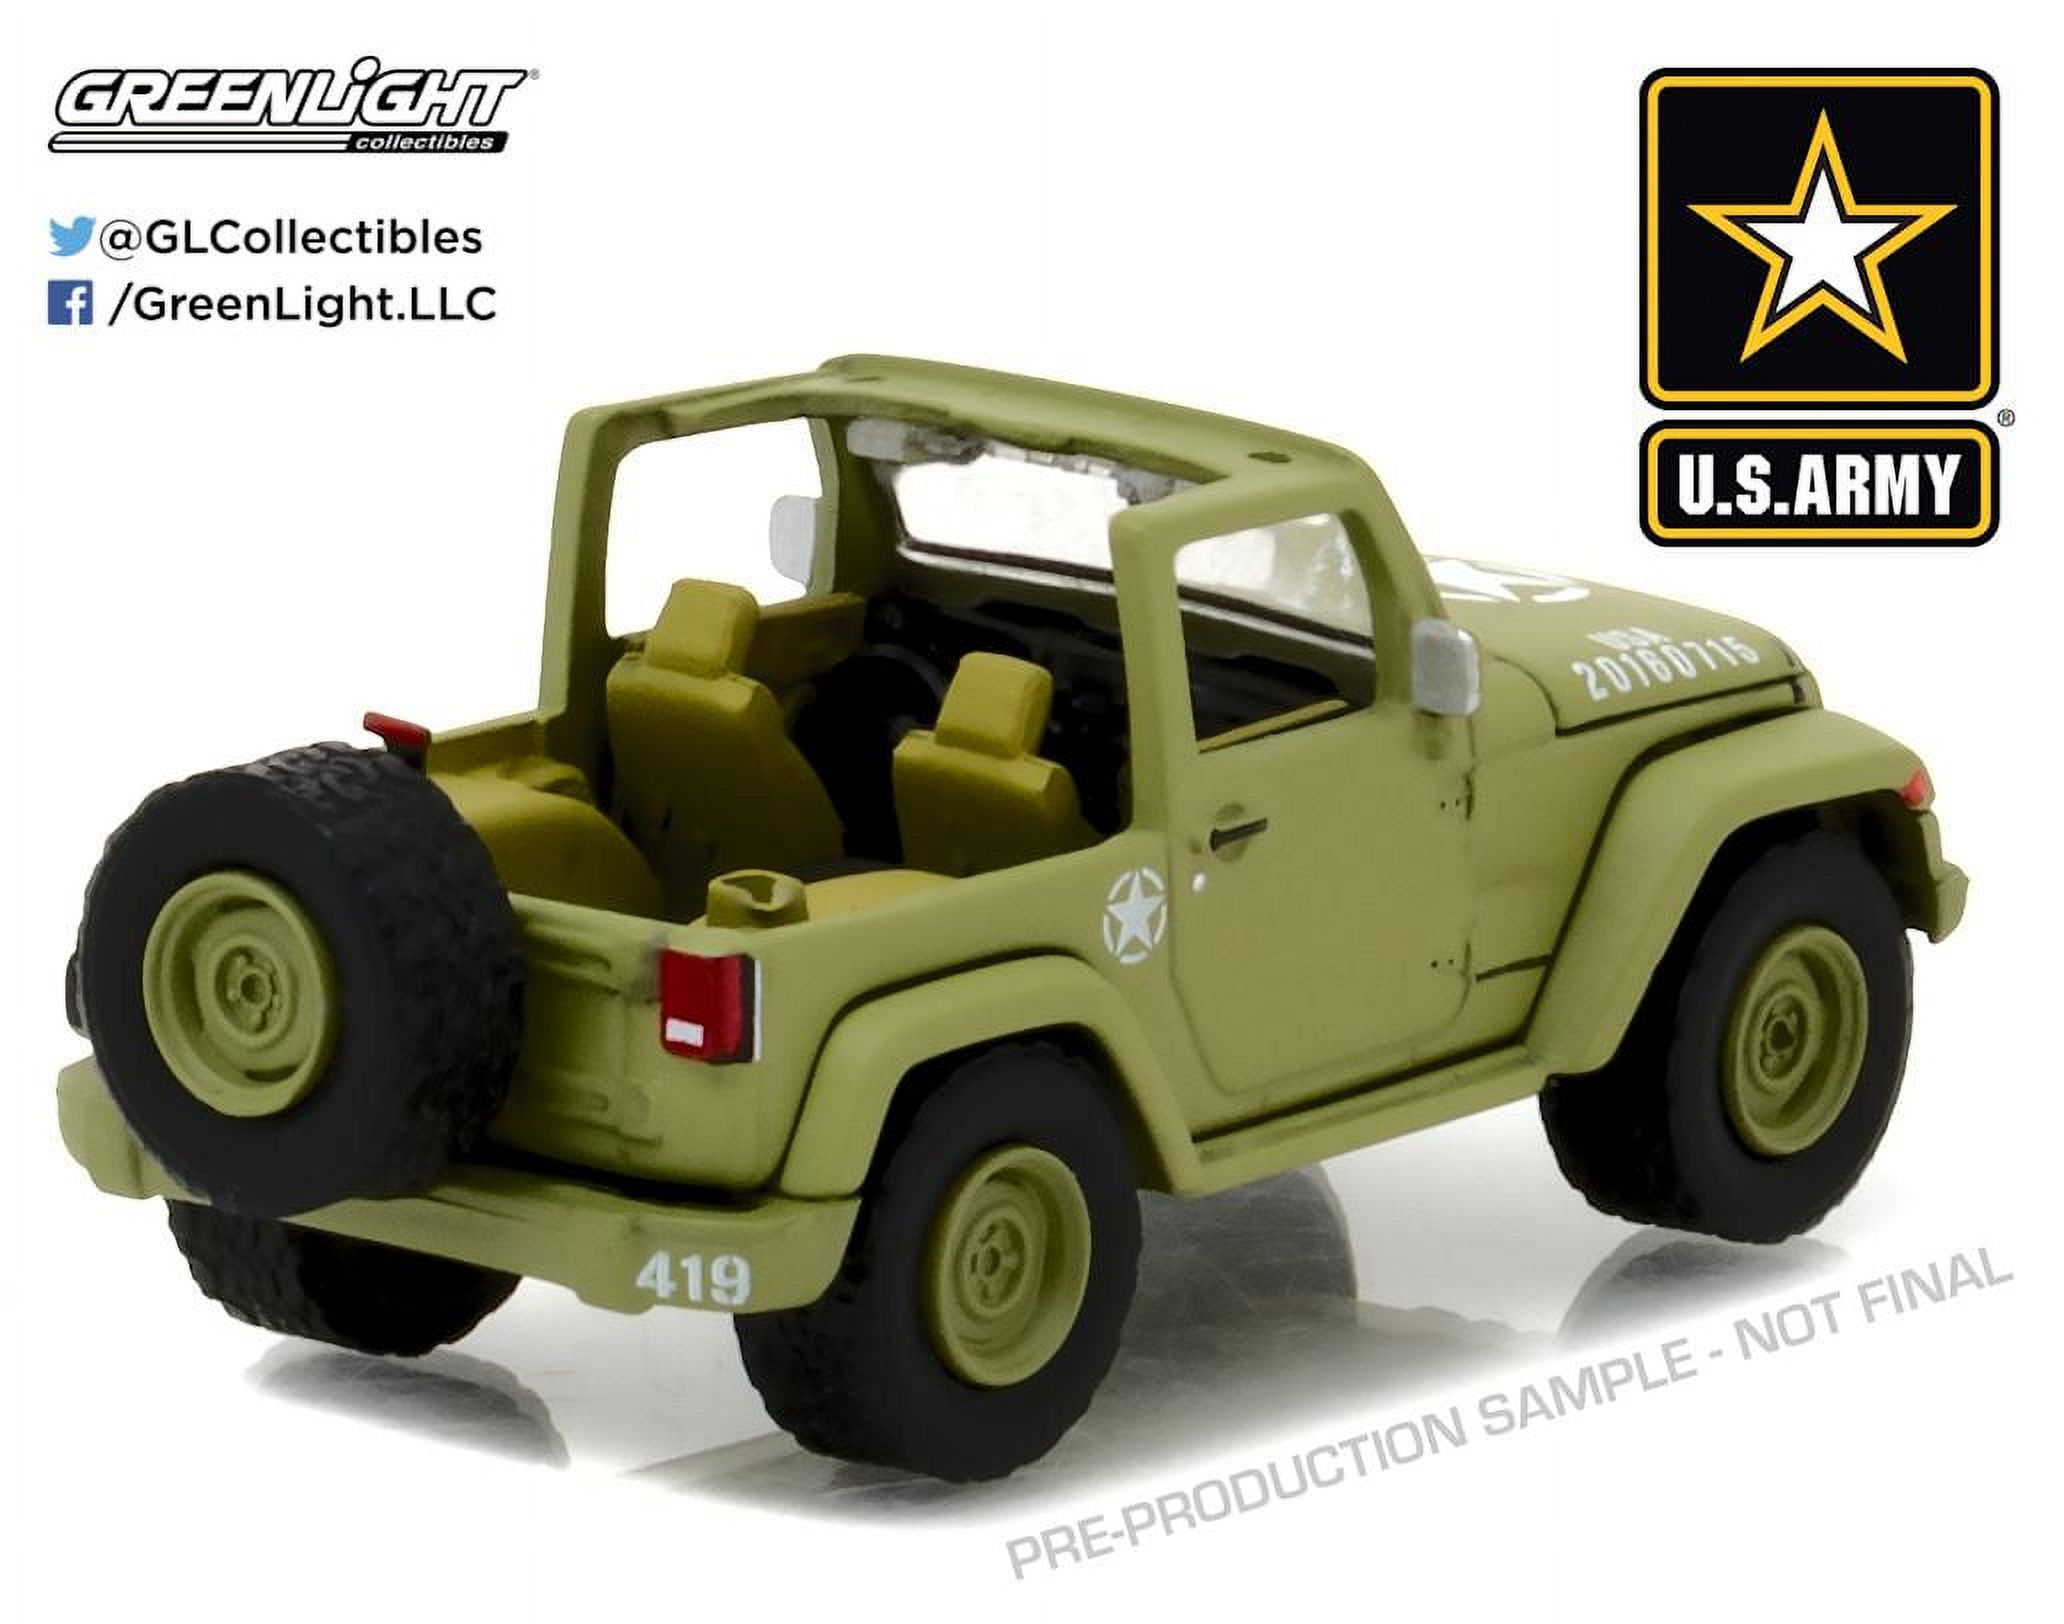 Greenlight 1:64 Hobby Exclusive 2016 Jeep Wrangler U.S Army With Soldier Figure - image 2 of 2